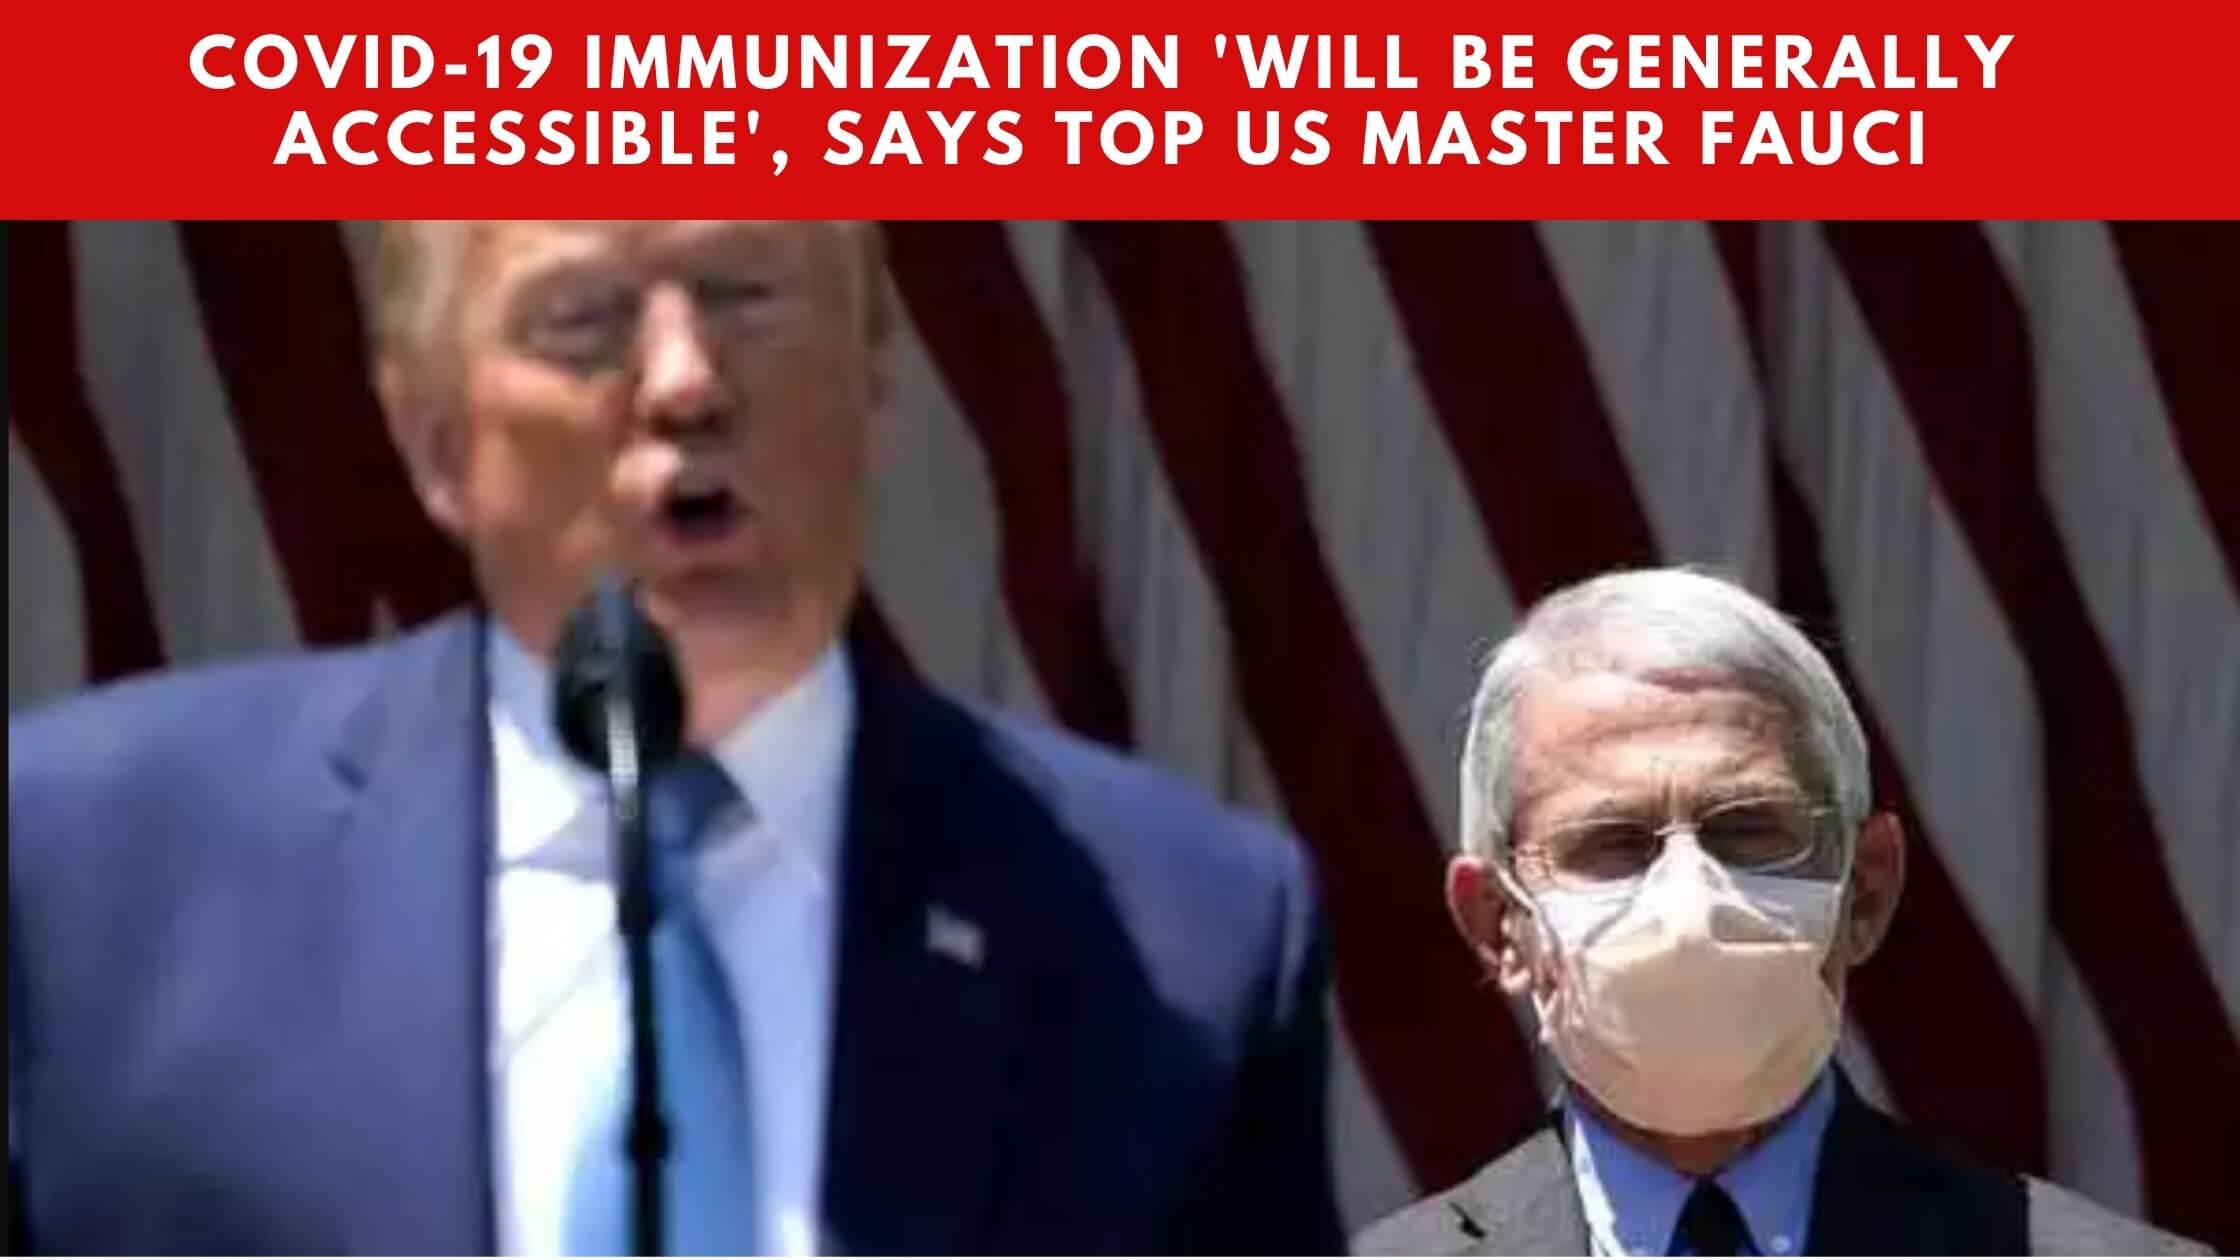 COVID-19 immunization 'will be generally accessible', says top US master Fauci